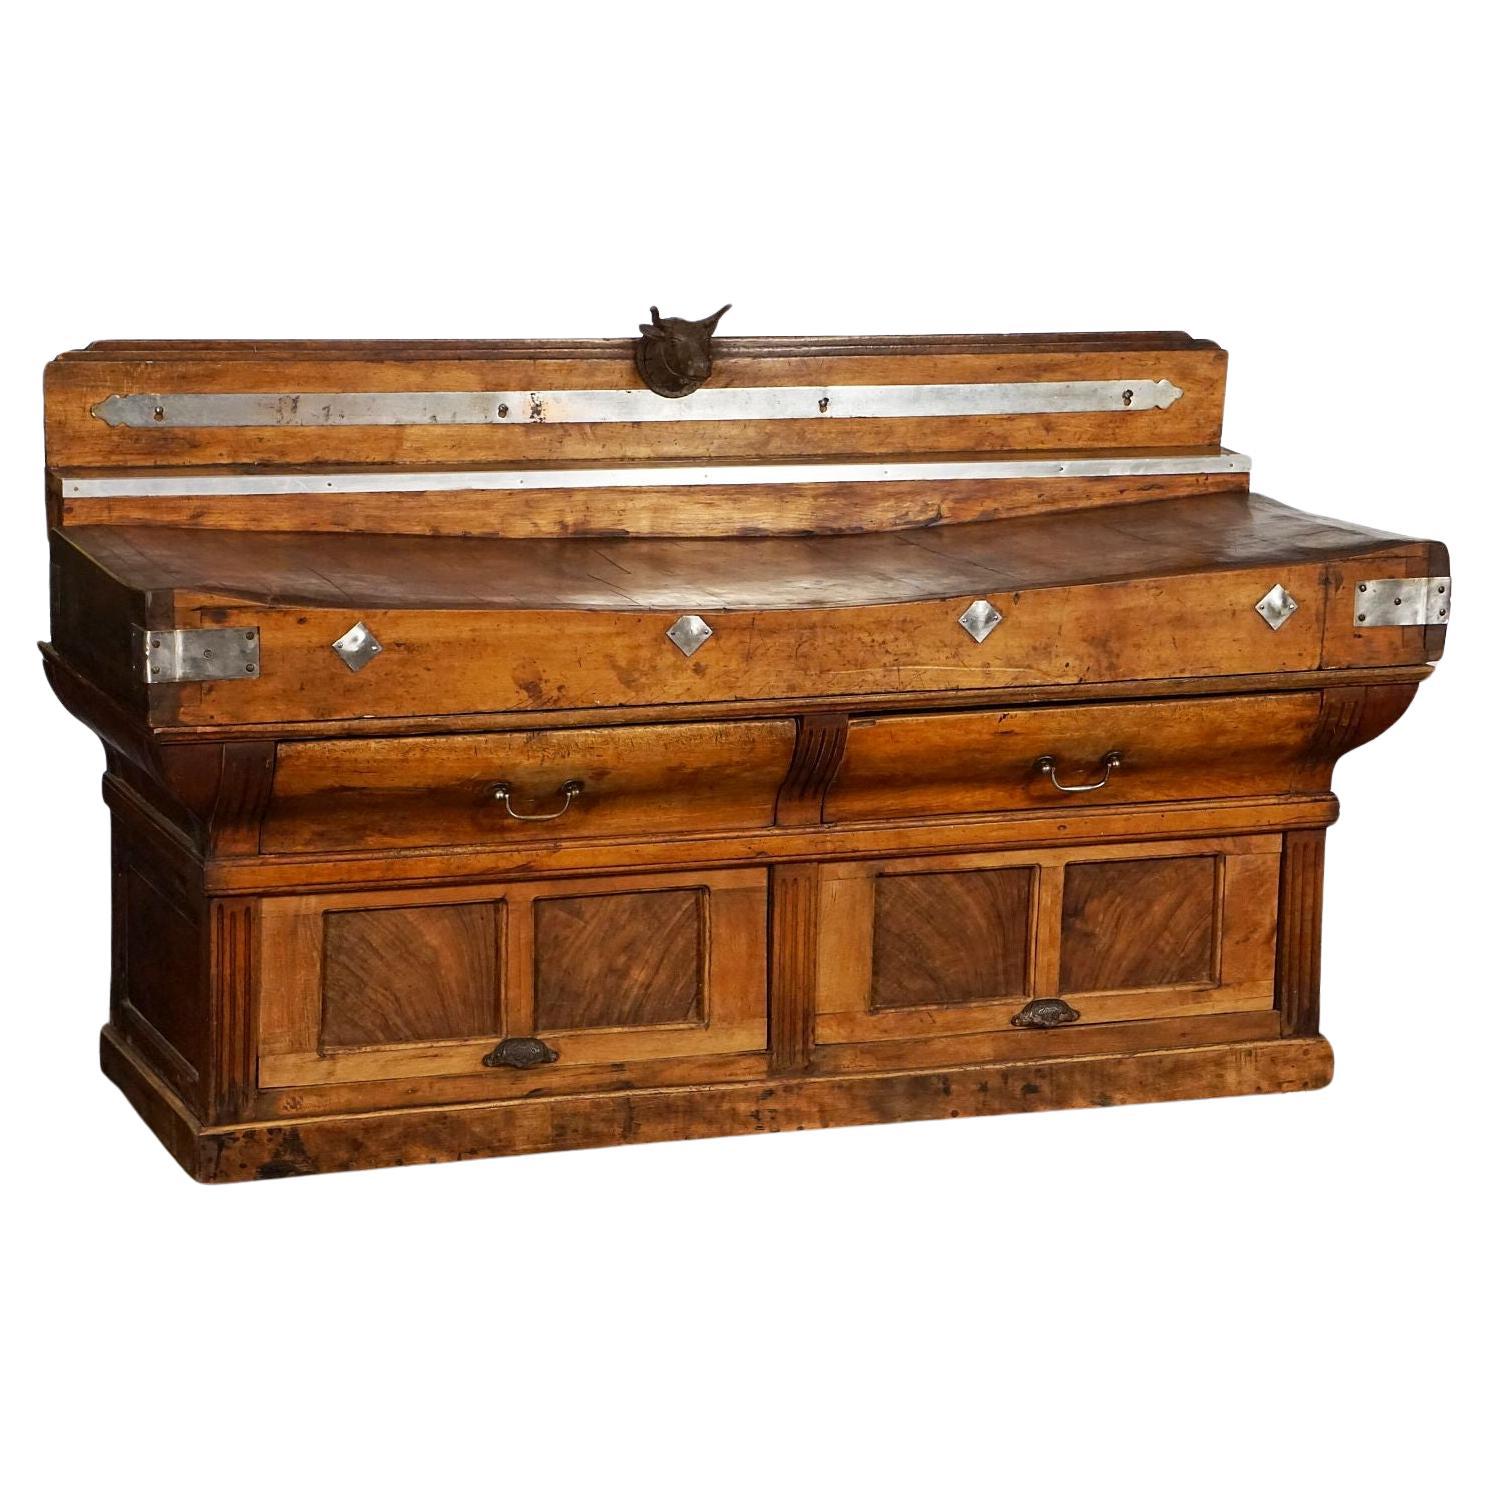 A fine large French butcher's chopping block or double billot de boucher from the late 19th century - with fixed wood backsplash that features a cast iron steer head mount in the center and steel accents. Large rectangular chopping block of mixed